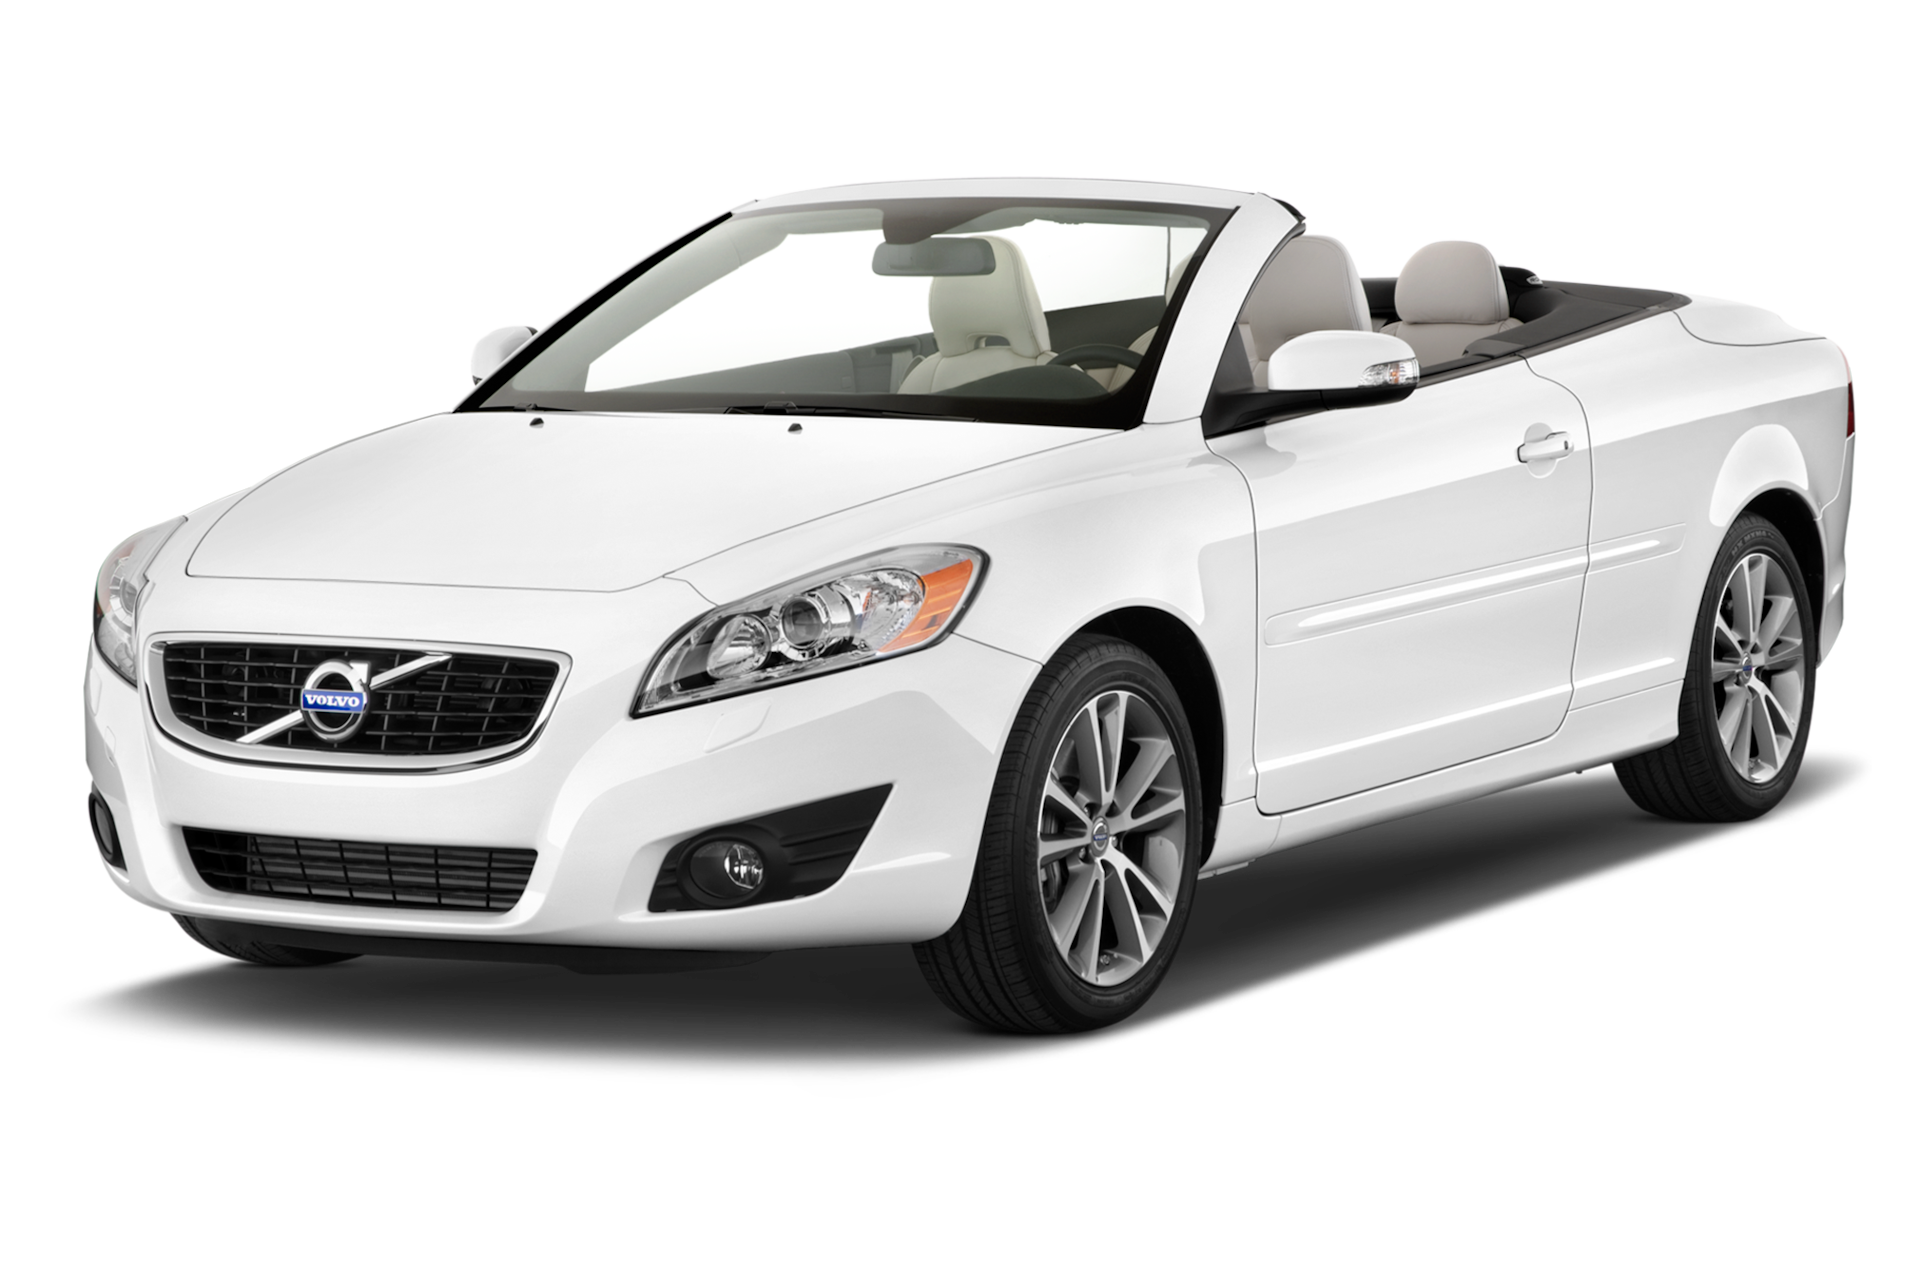 2013 Volvo C70 Prices, Reviews, and Photos - MotorTrend